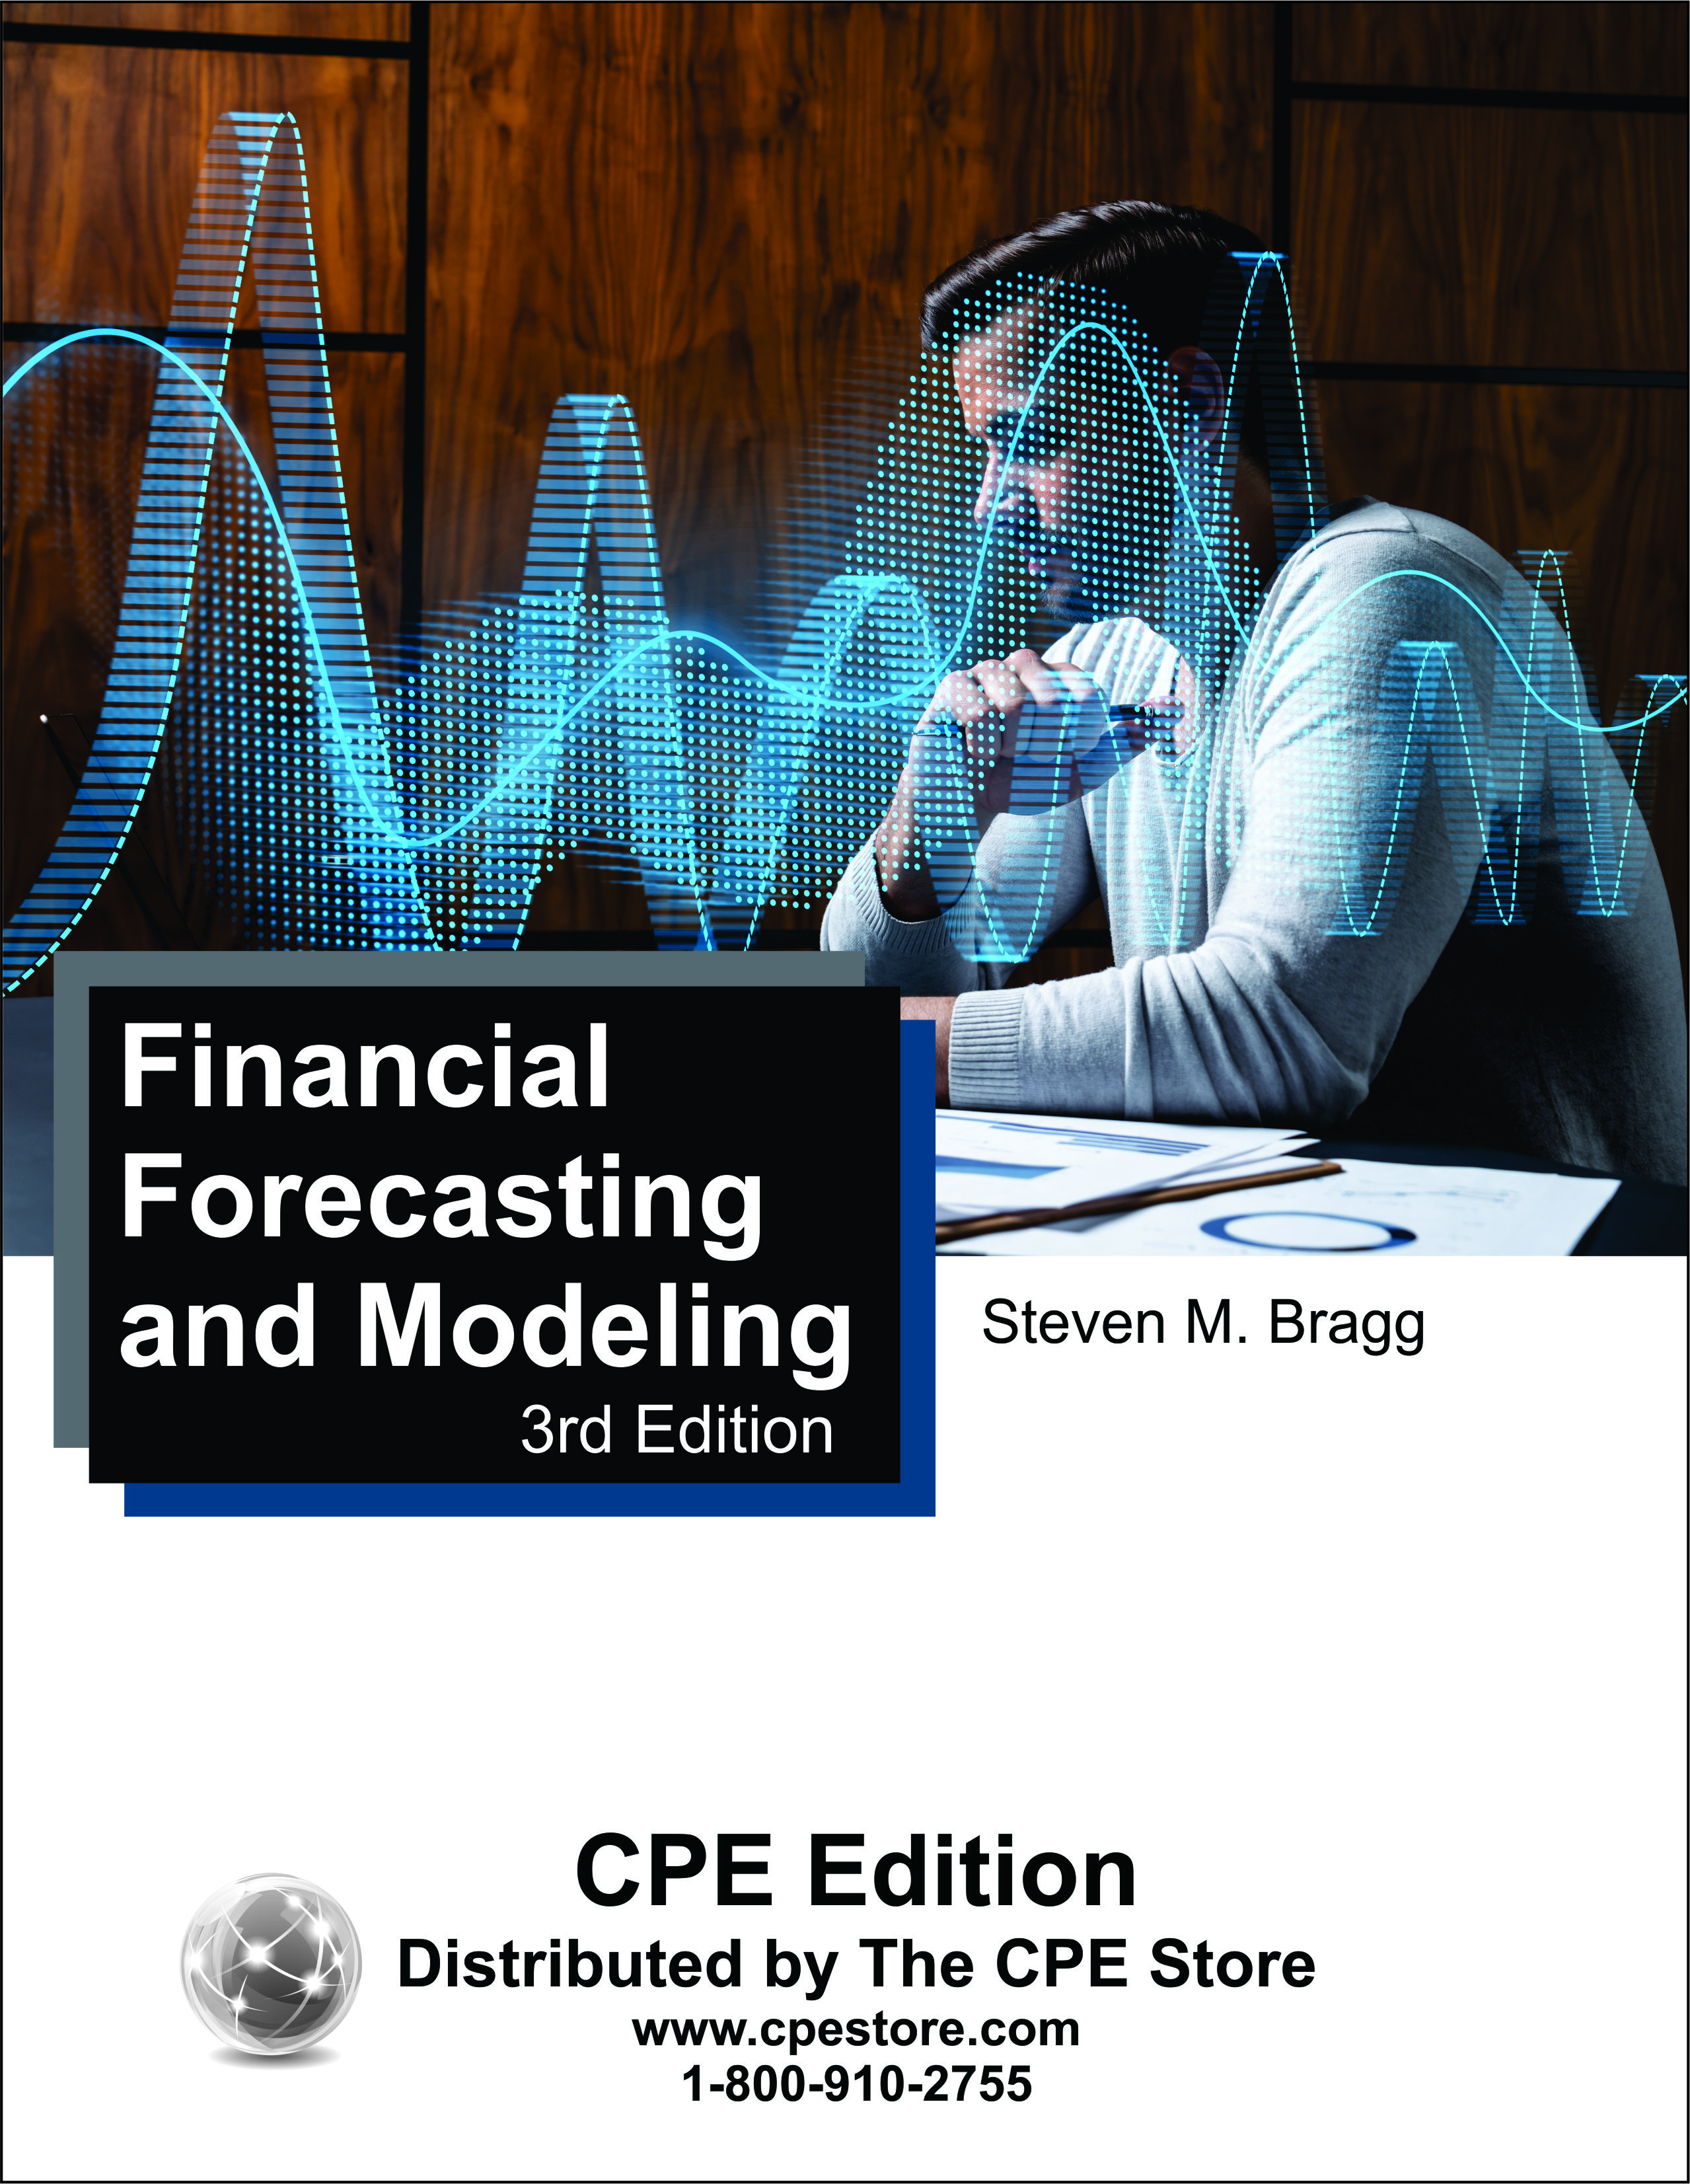 Financial Forecasting and Modeling